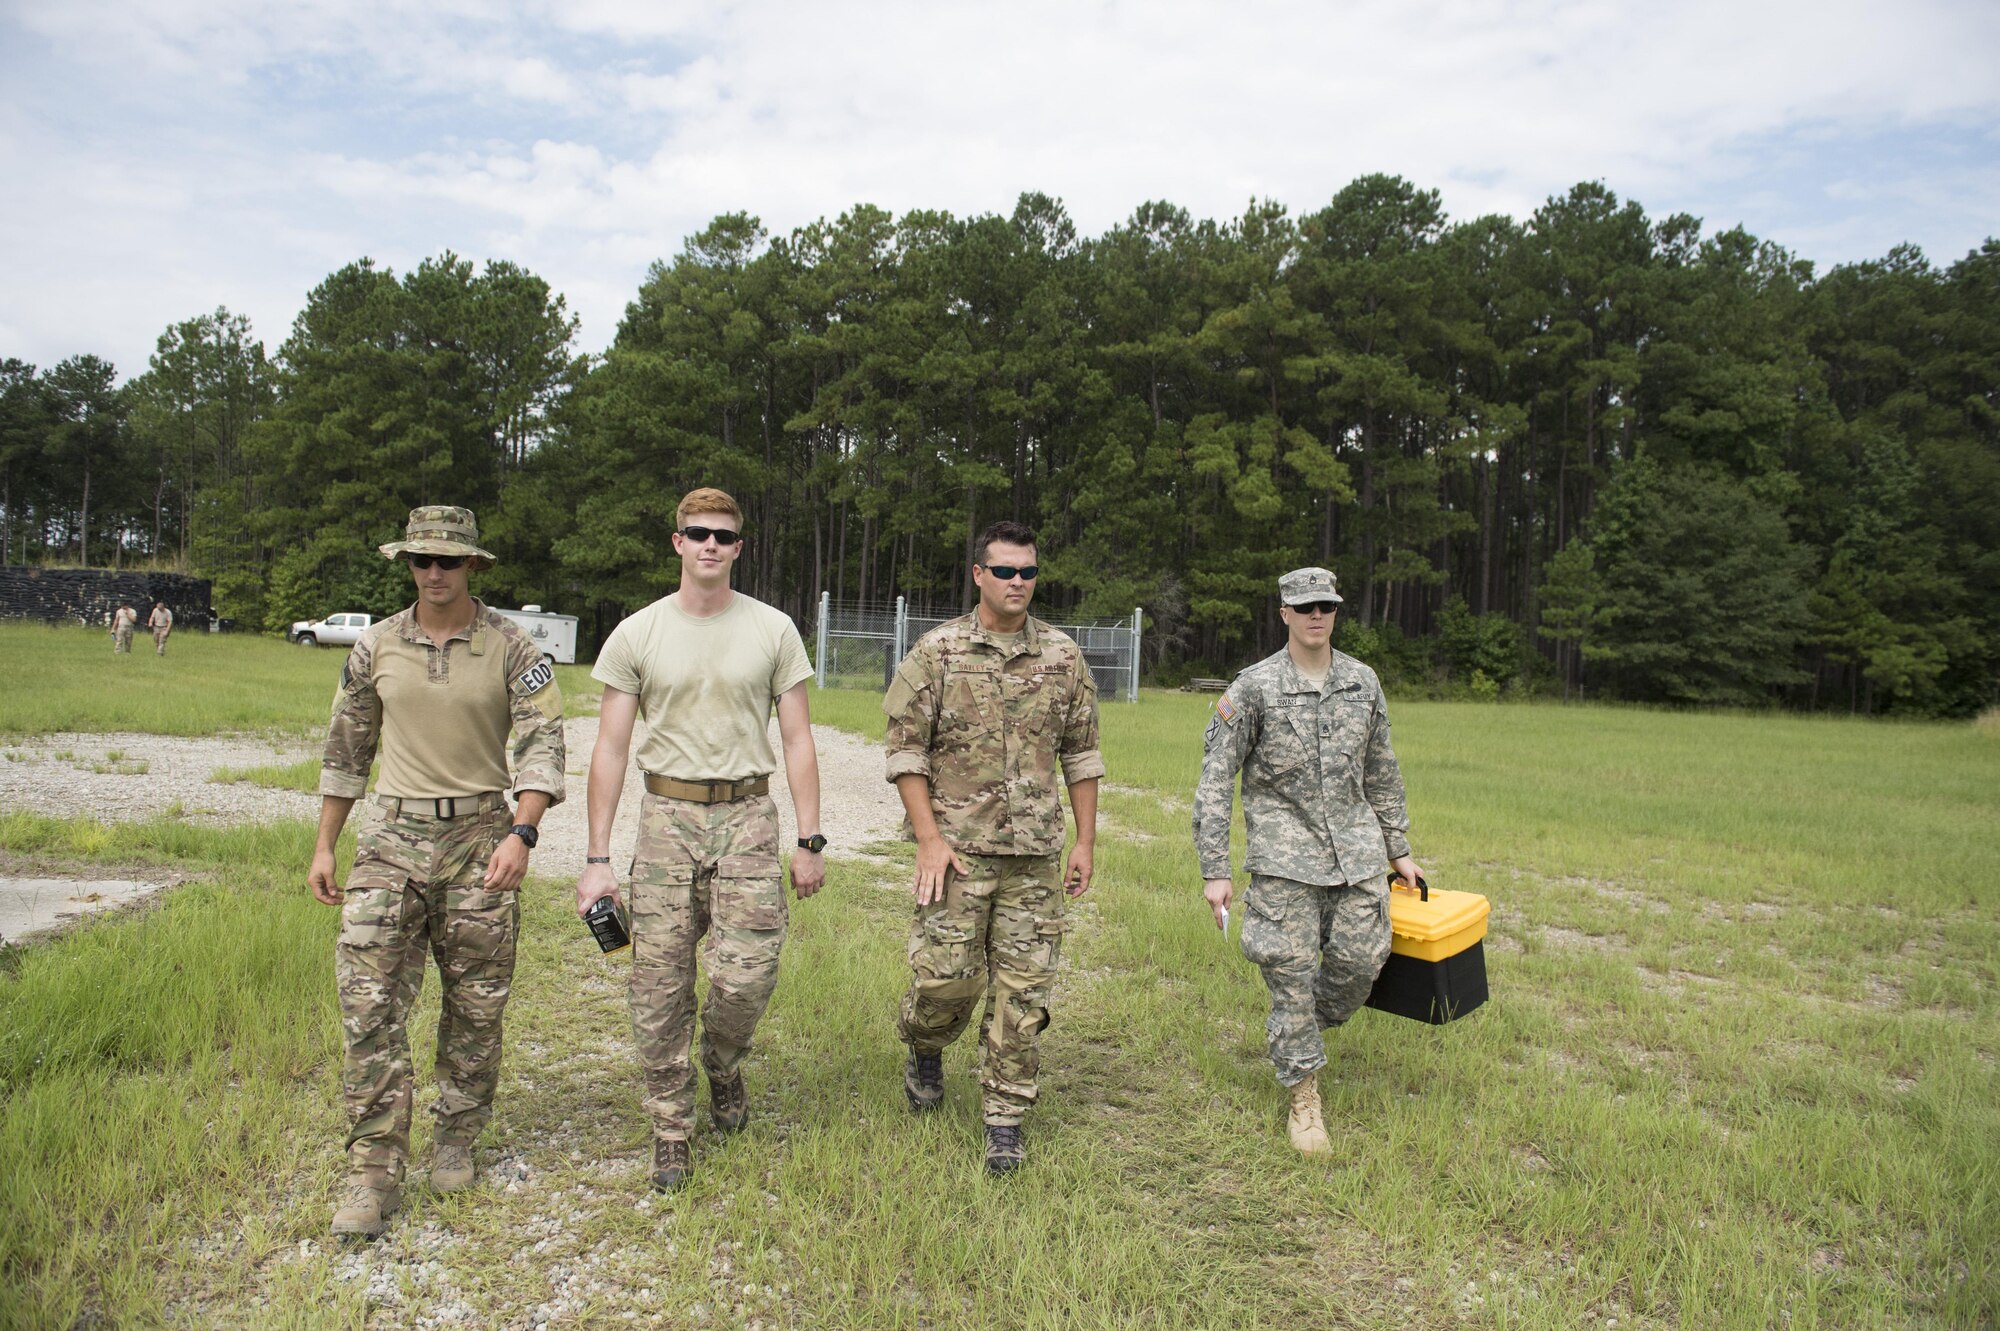 Airmen and a Soldier walk toward a controlled explosion site, Aug. 3, 2016 at Joint Base Charleston – Weapons Station, S.C. The joint post-blast analysis training exercise included 22 participants from the Kentucky Air National Guard, South Carolina Air National Guard, Army South Carolina Guard, MacDill Air Force Base, Fla. Seymour Johnson Air Force Base, N.C., 628th Civil Engineering Squadron and 315th CEF. The trainees honed their skills of collecting evidence after an IED attack. (U.S. Air Force photo/Staff Sgt. Jared Trimarchi)